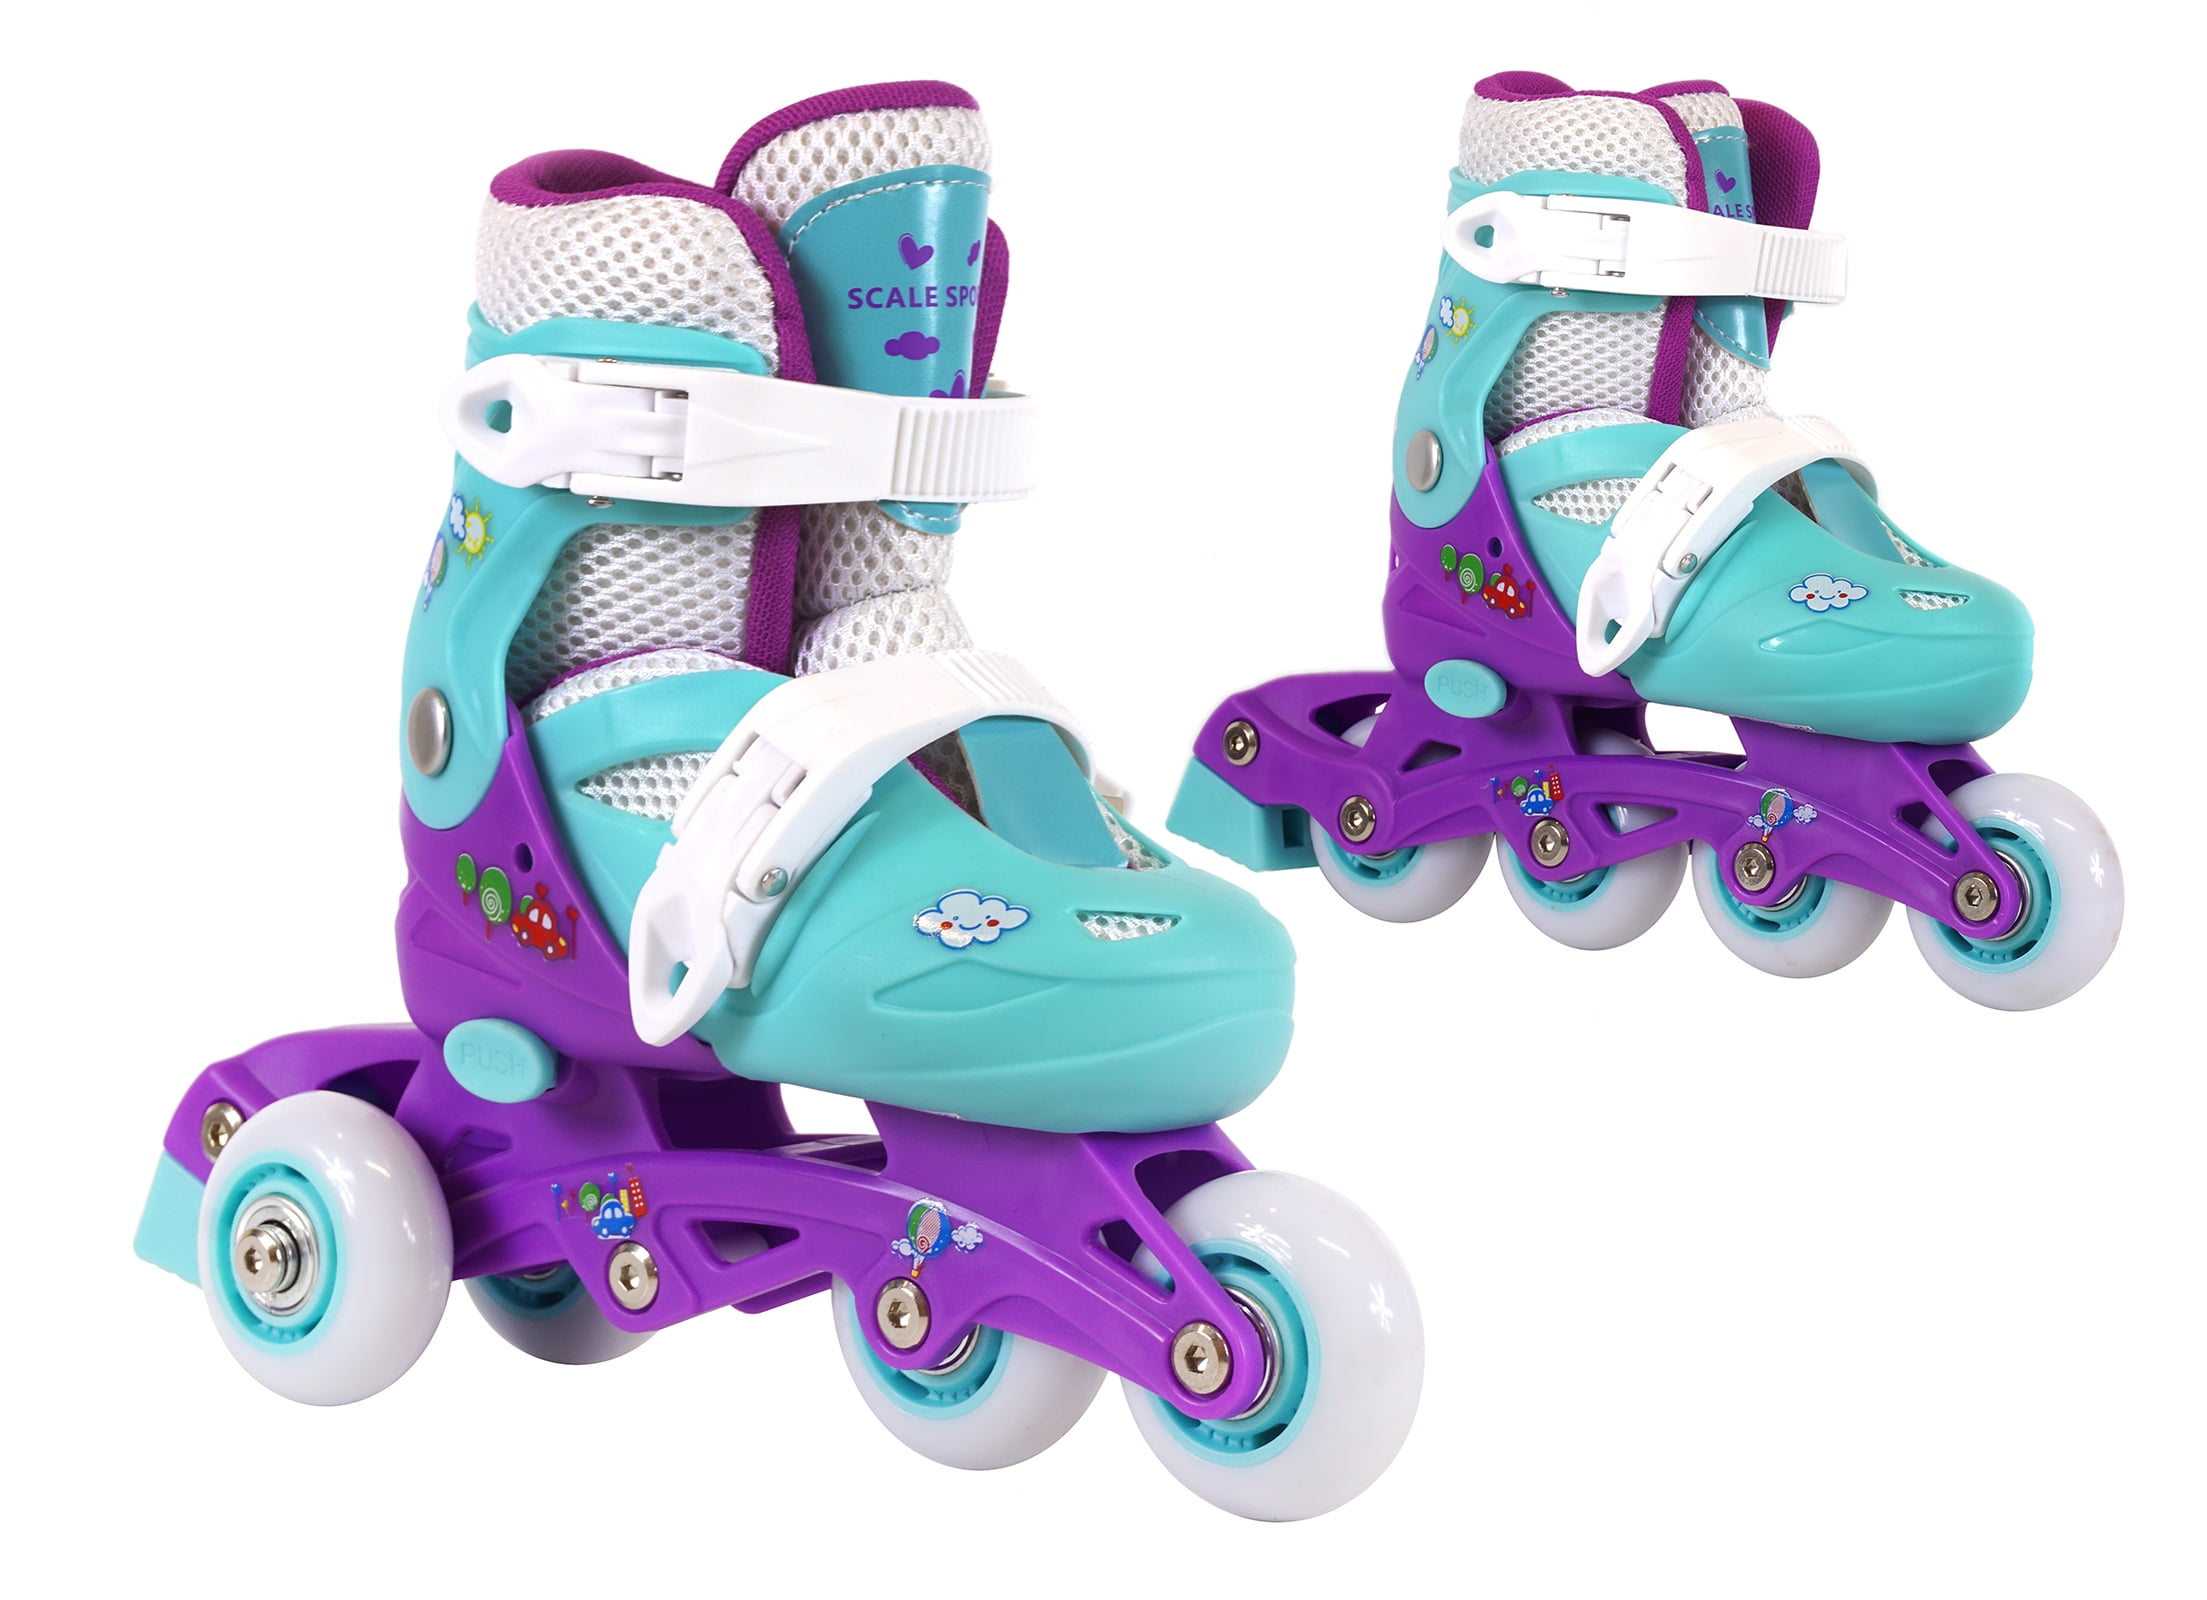 Kids and Ladies Rollerskates 2in1 set meteor 2in1 Roller Skates and Ice Skates Purchase and have fun for the whole year